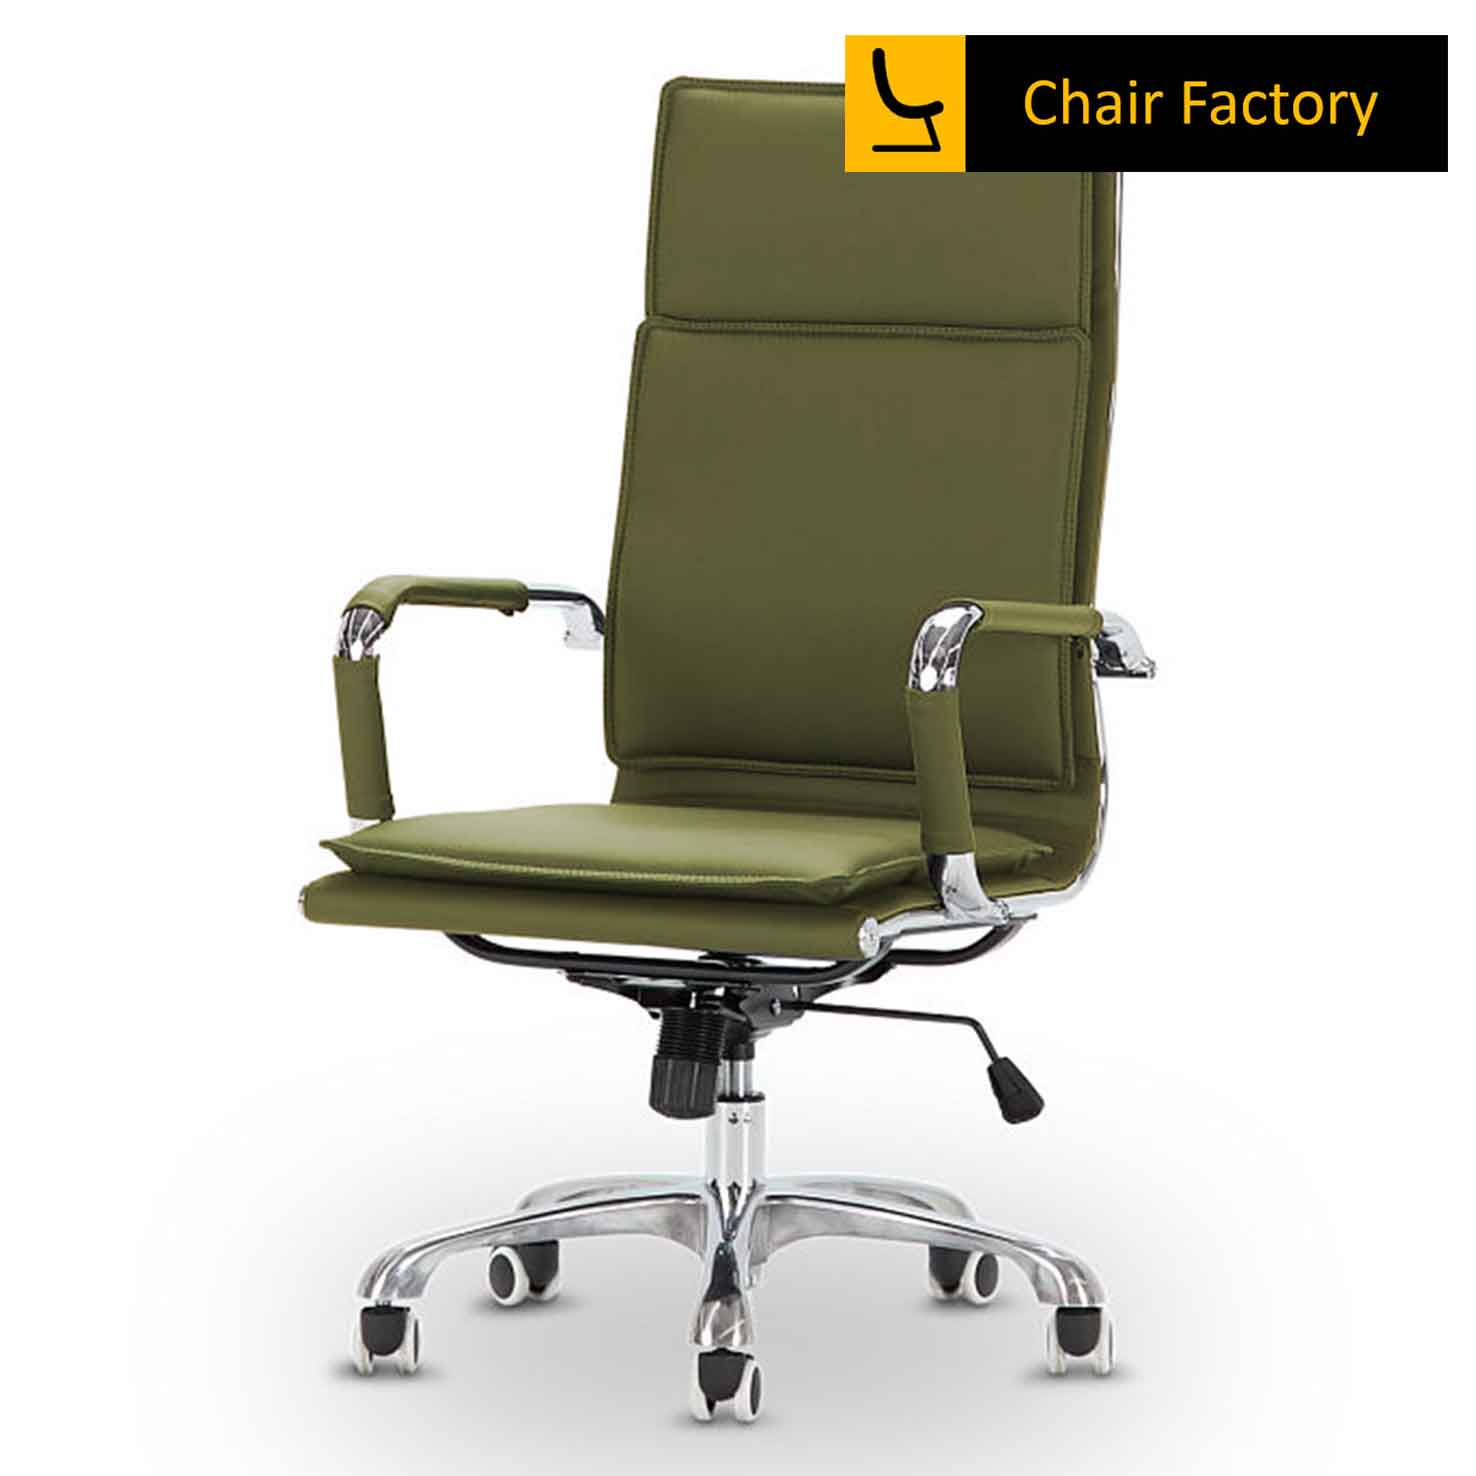 James Double Cushion Olive Green High Back Office Chair 